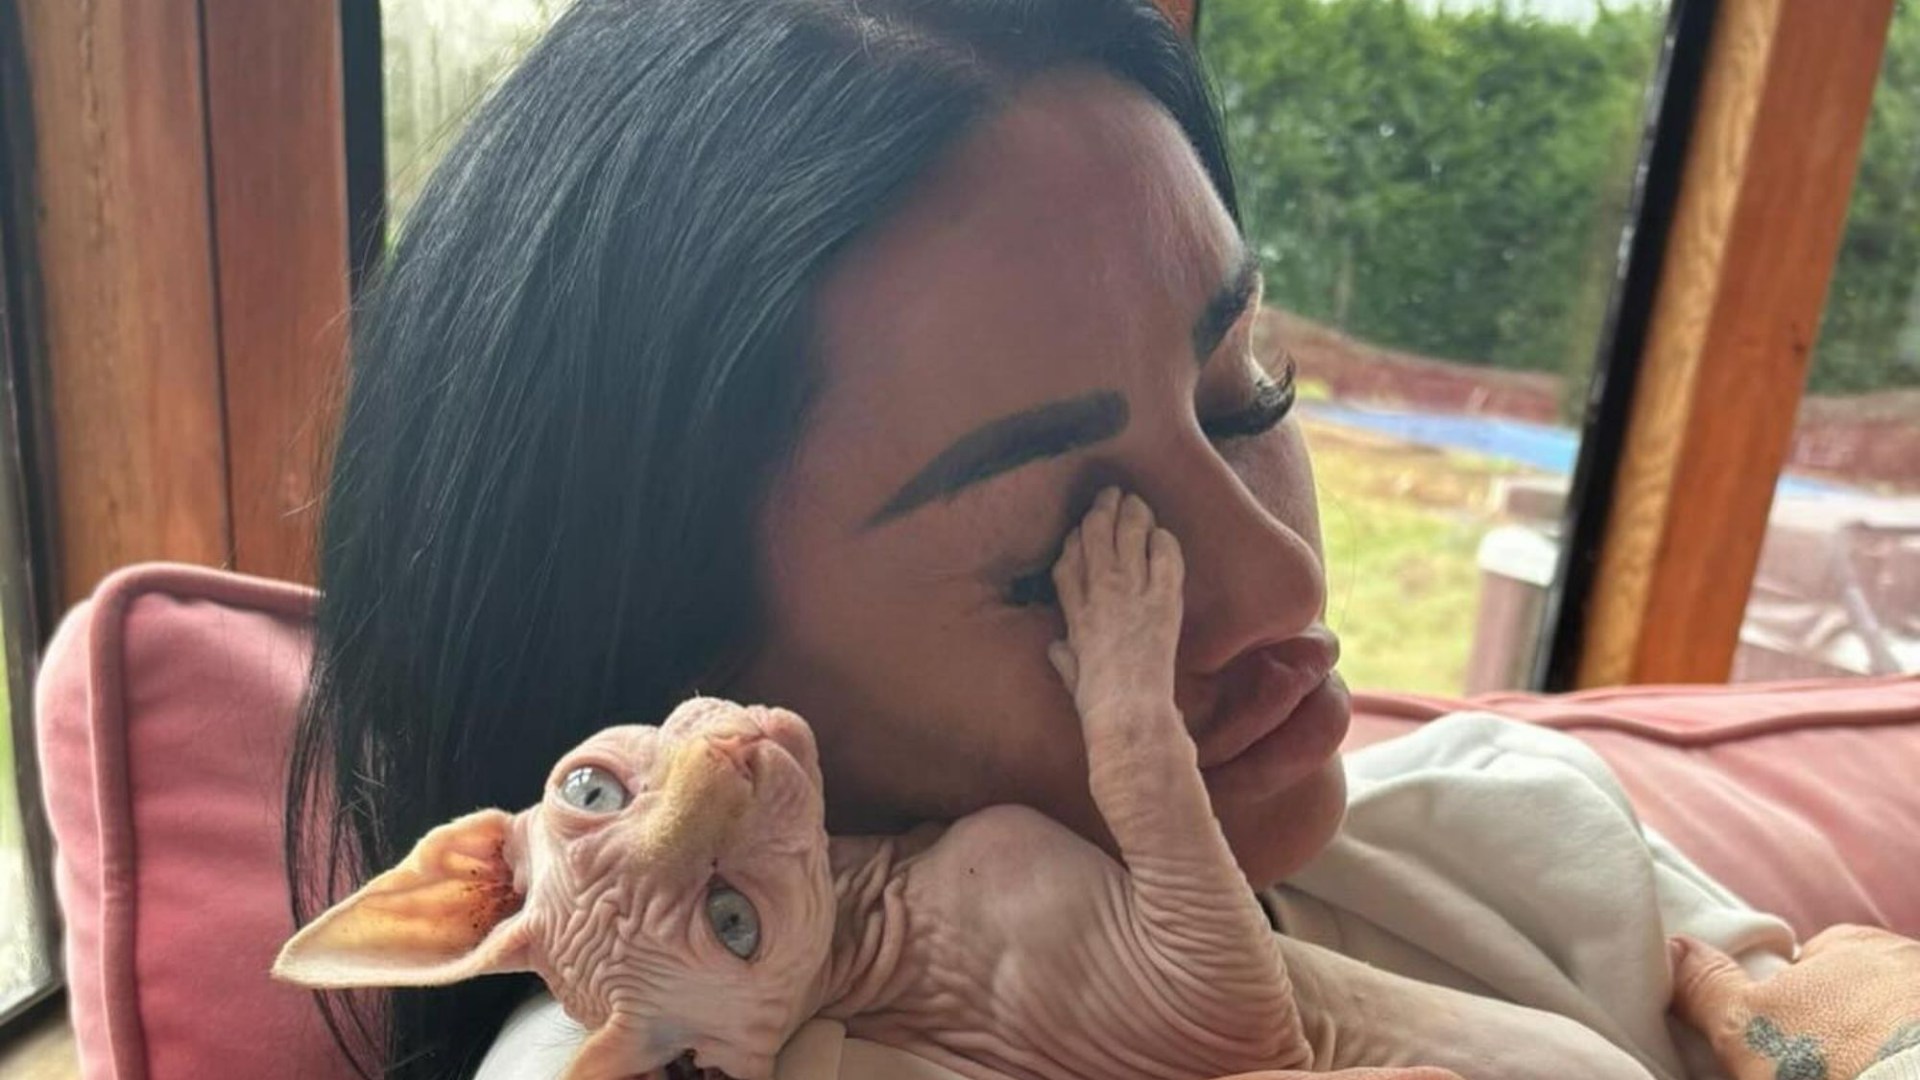 Outrageous! Katie Price faces backlash over designer cat cuddles – Should she be banned from owning pets?